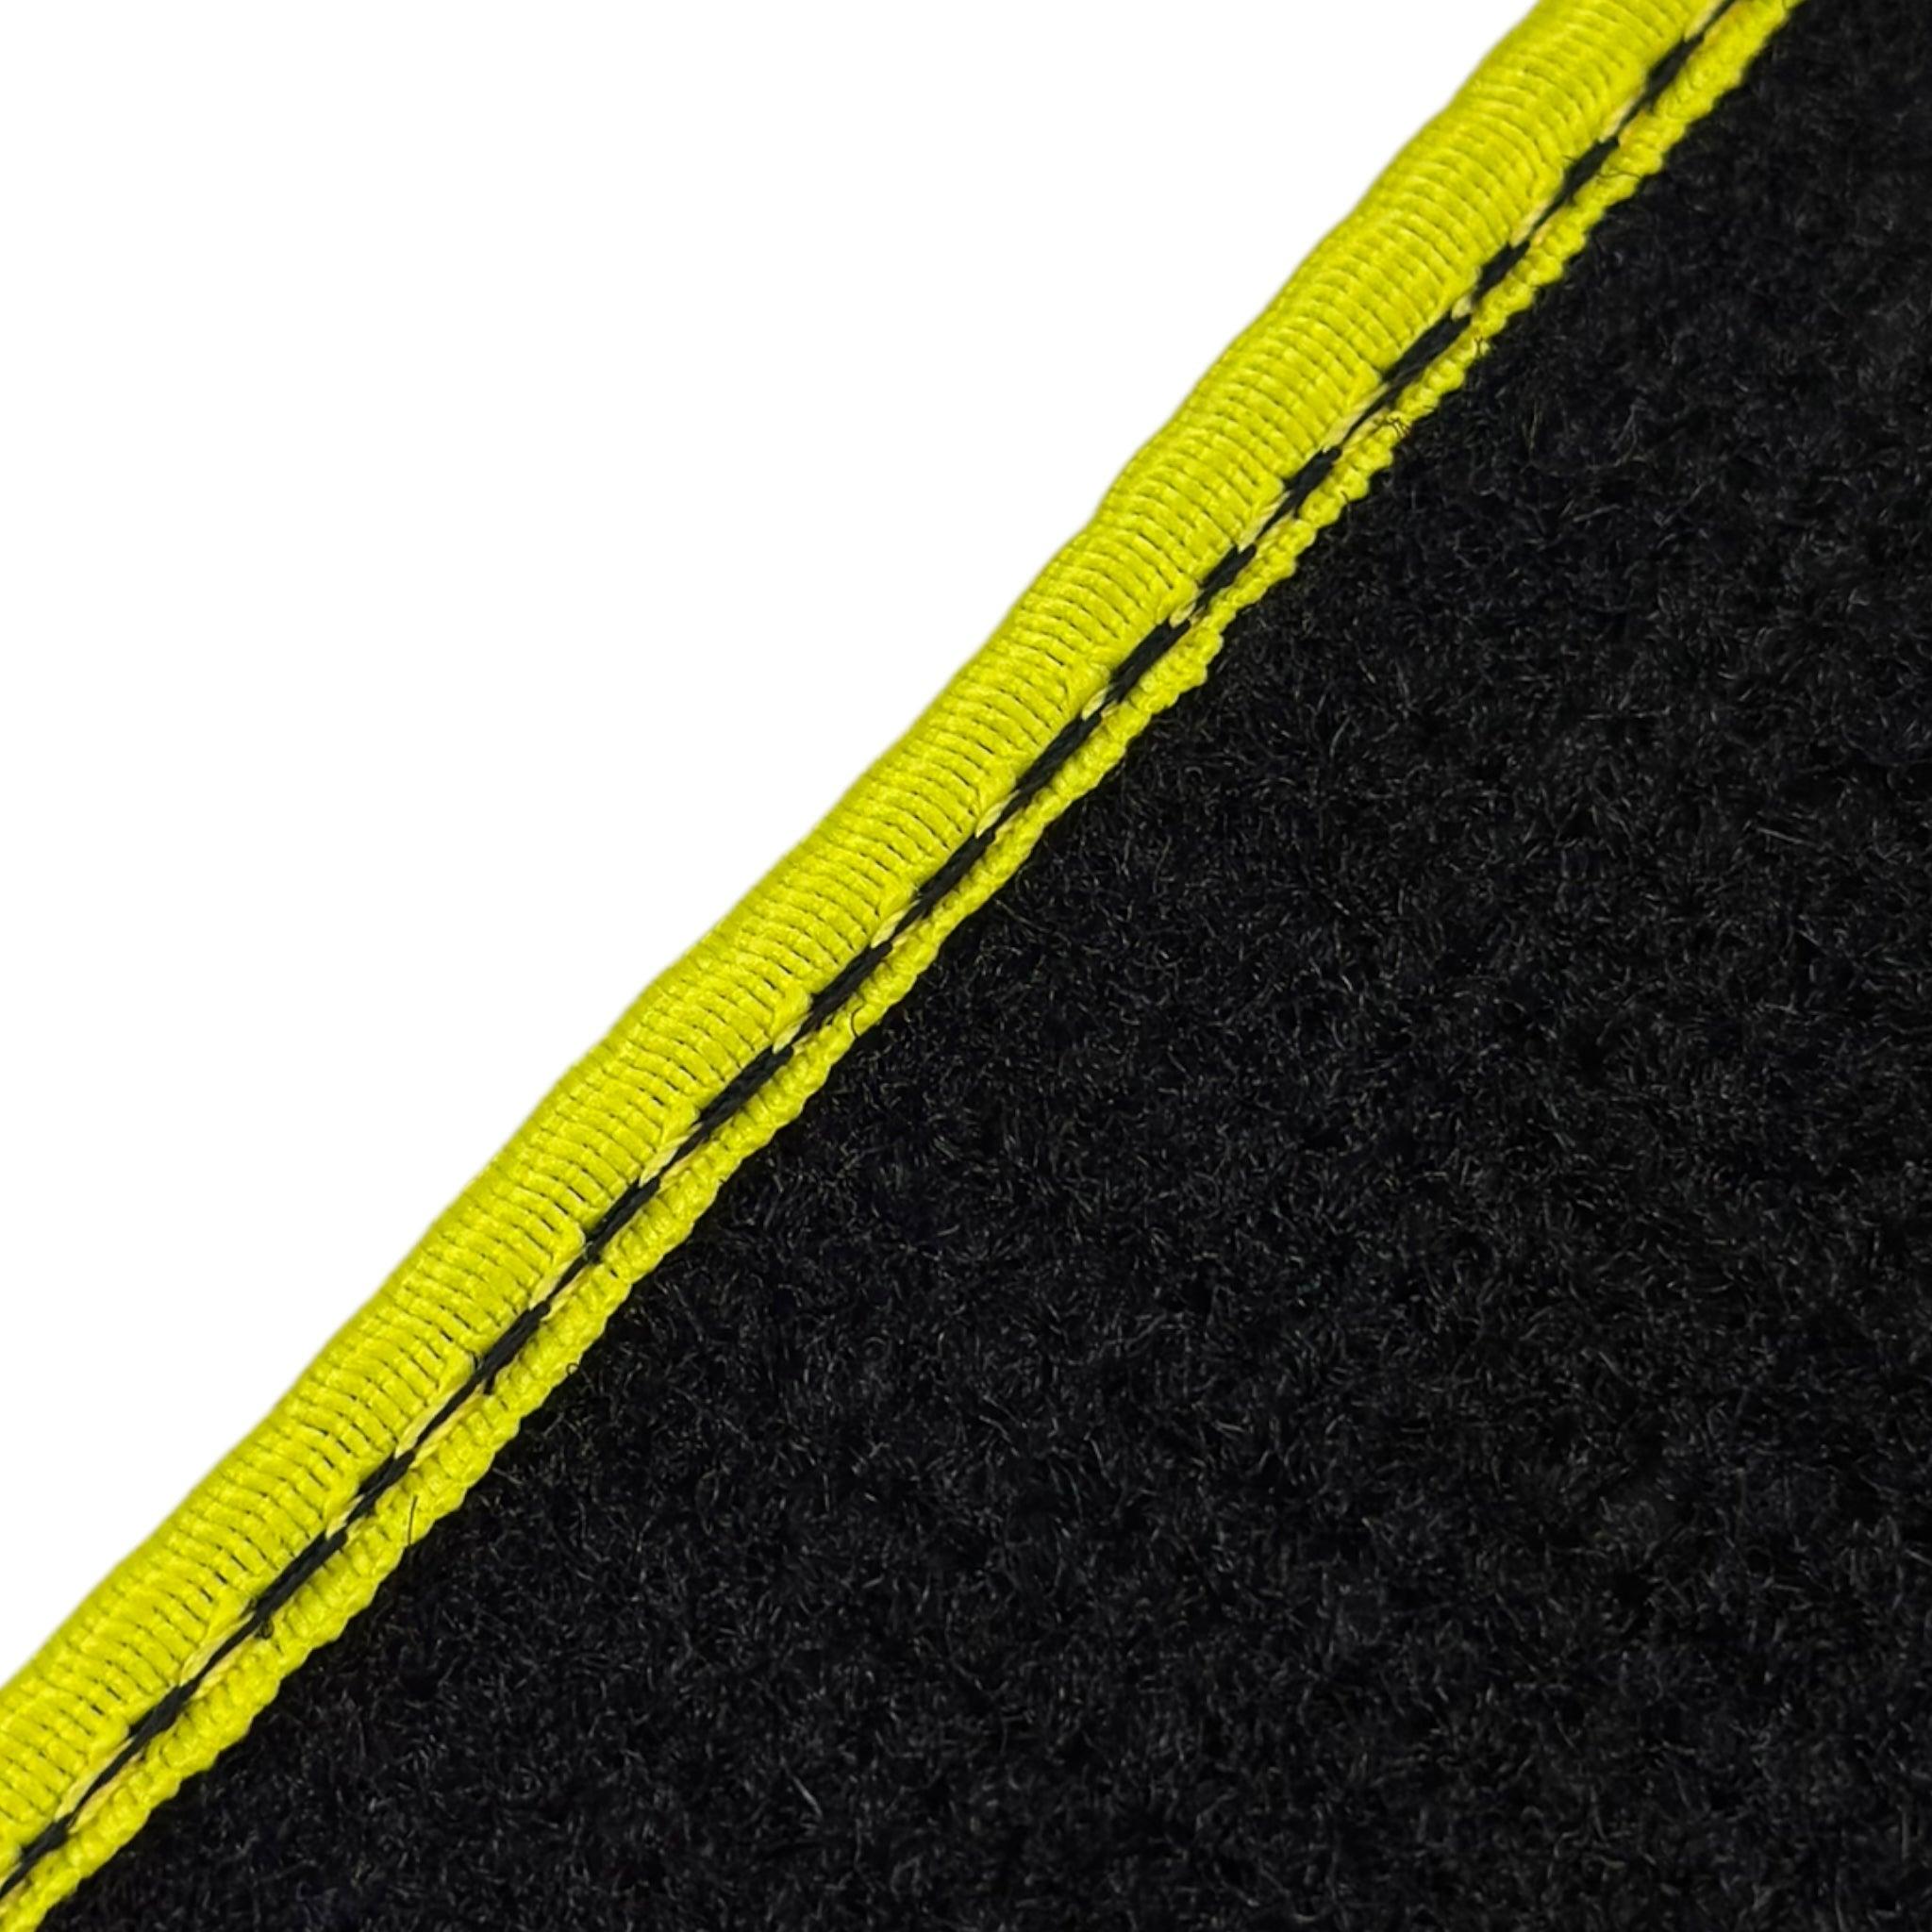 Black Floor Mats For BMW M3 E46 | Fighter Jet Edition | Yellow Trim